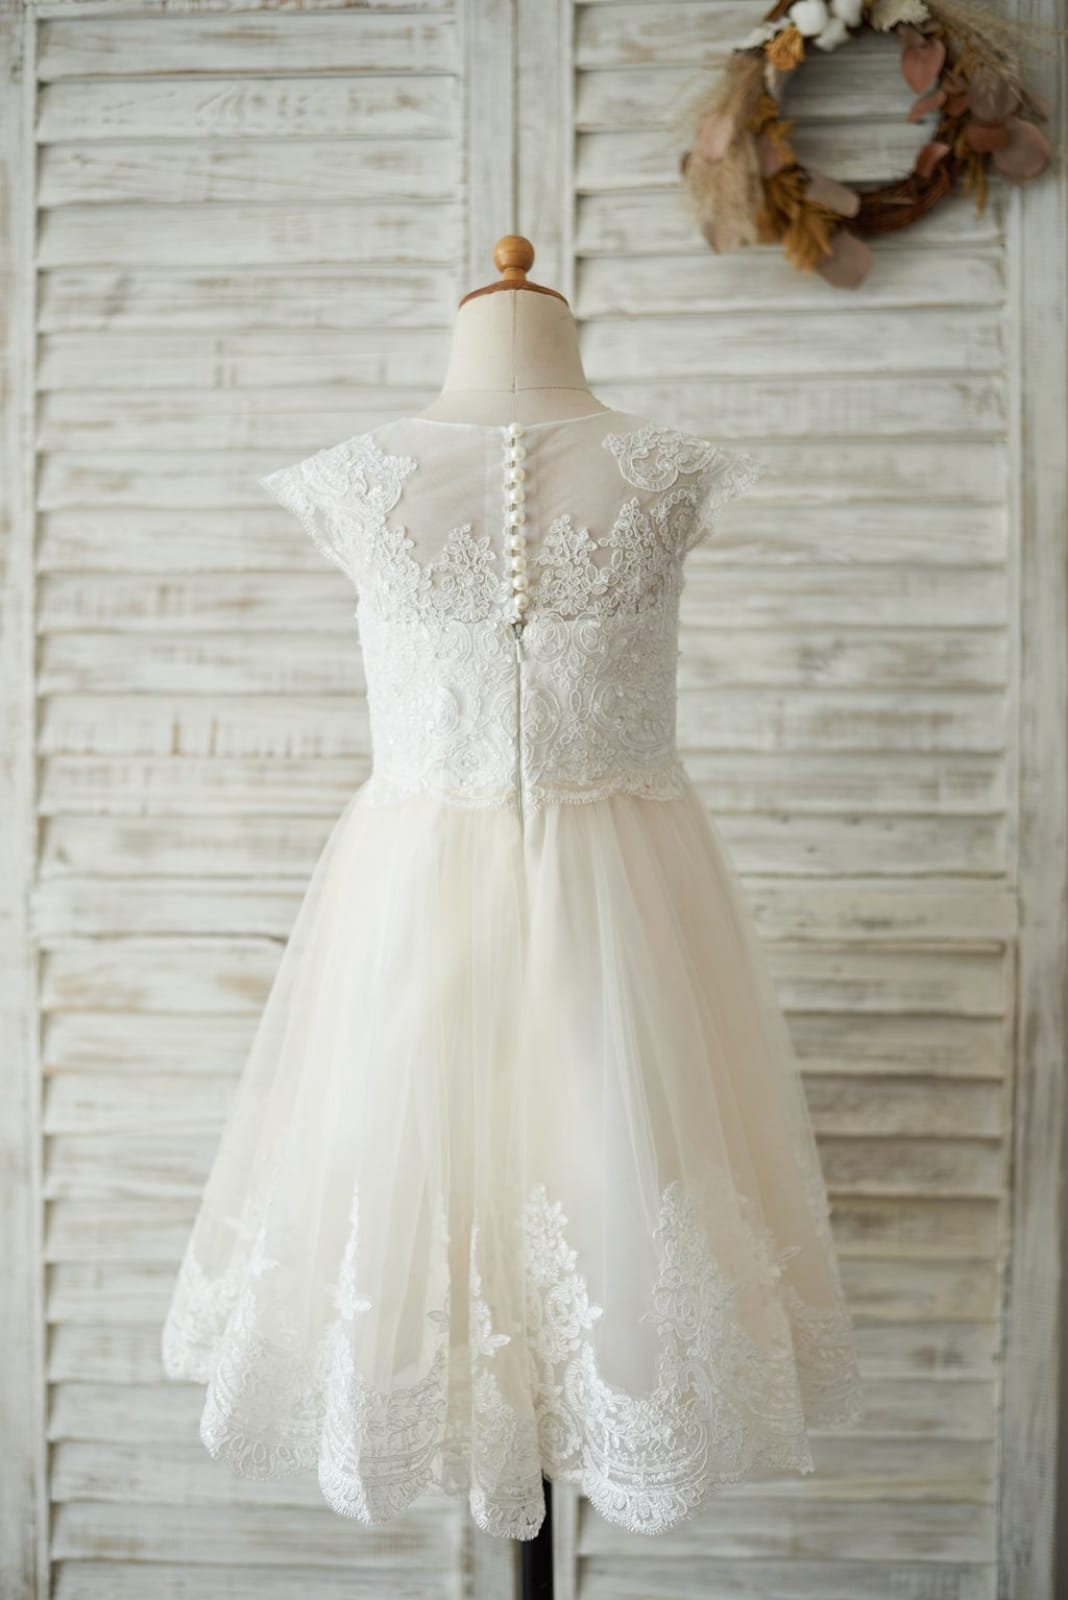 Ivory Lace Champagne Tulle Cap Sleeves Wedding Flower Girl Dress